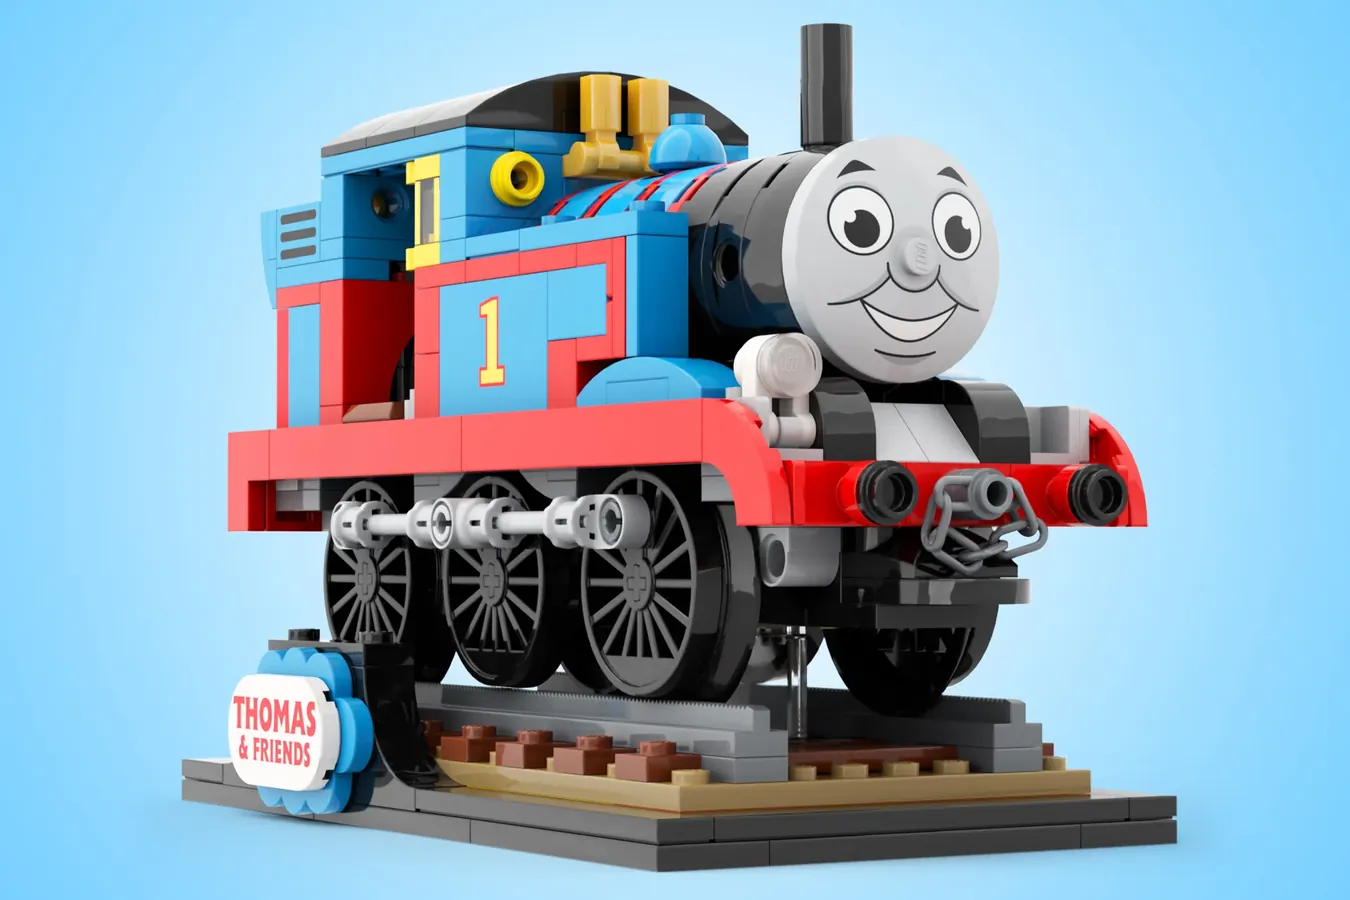 Lego® Thomas the Tank Engine” advances into product review: 2nd 10,000 support design introduction in 2022